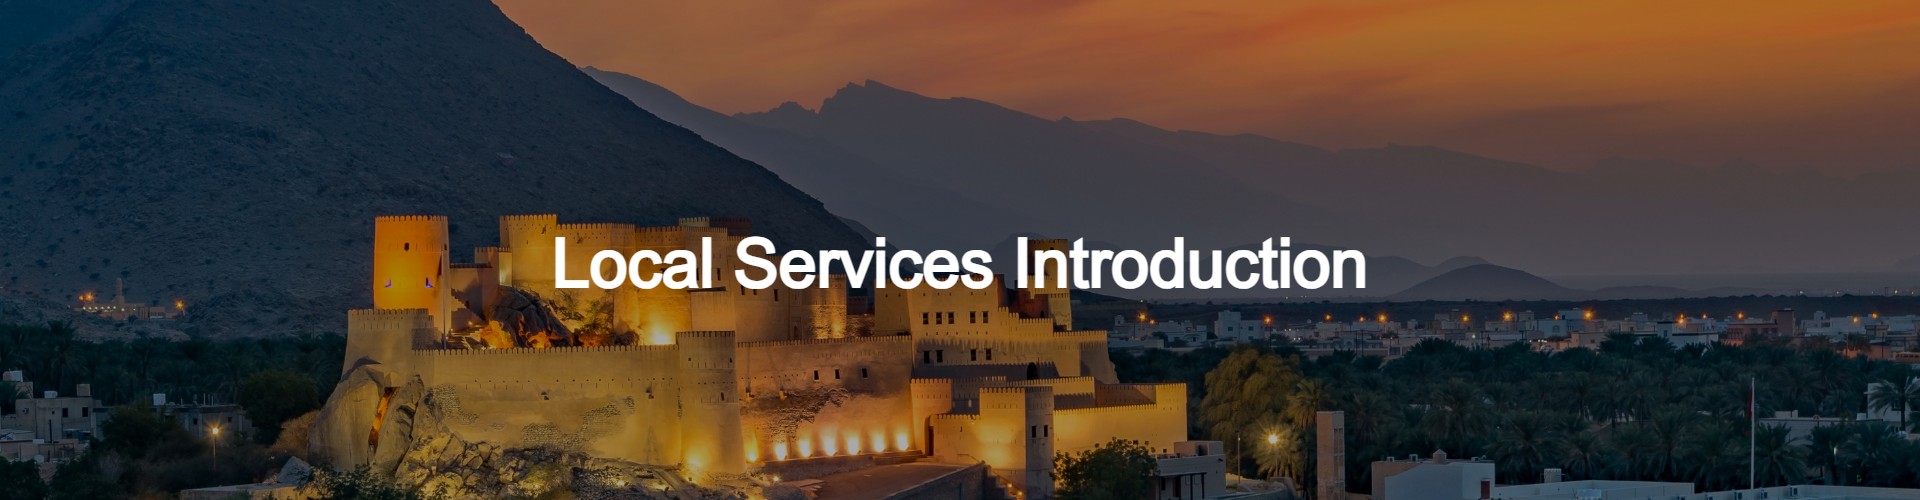 Local services introduction